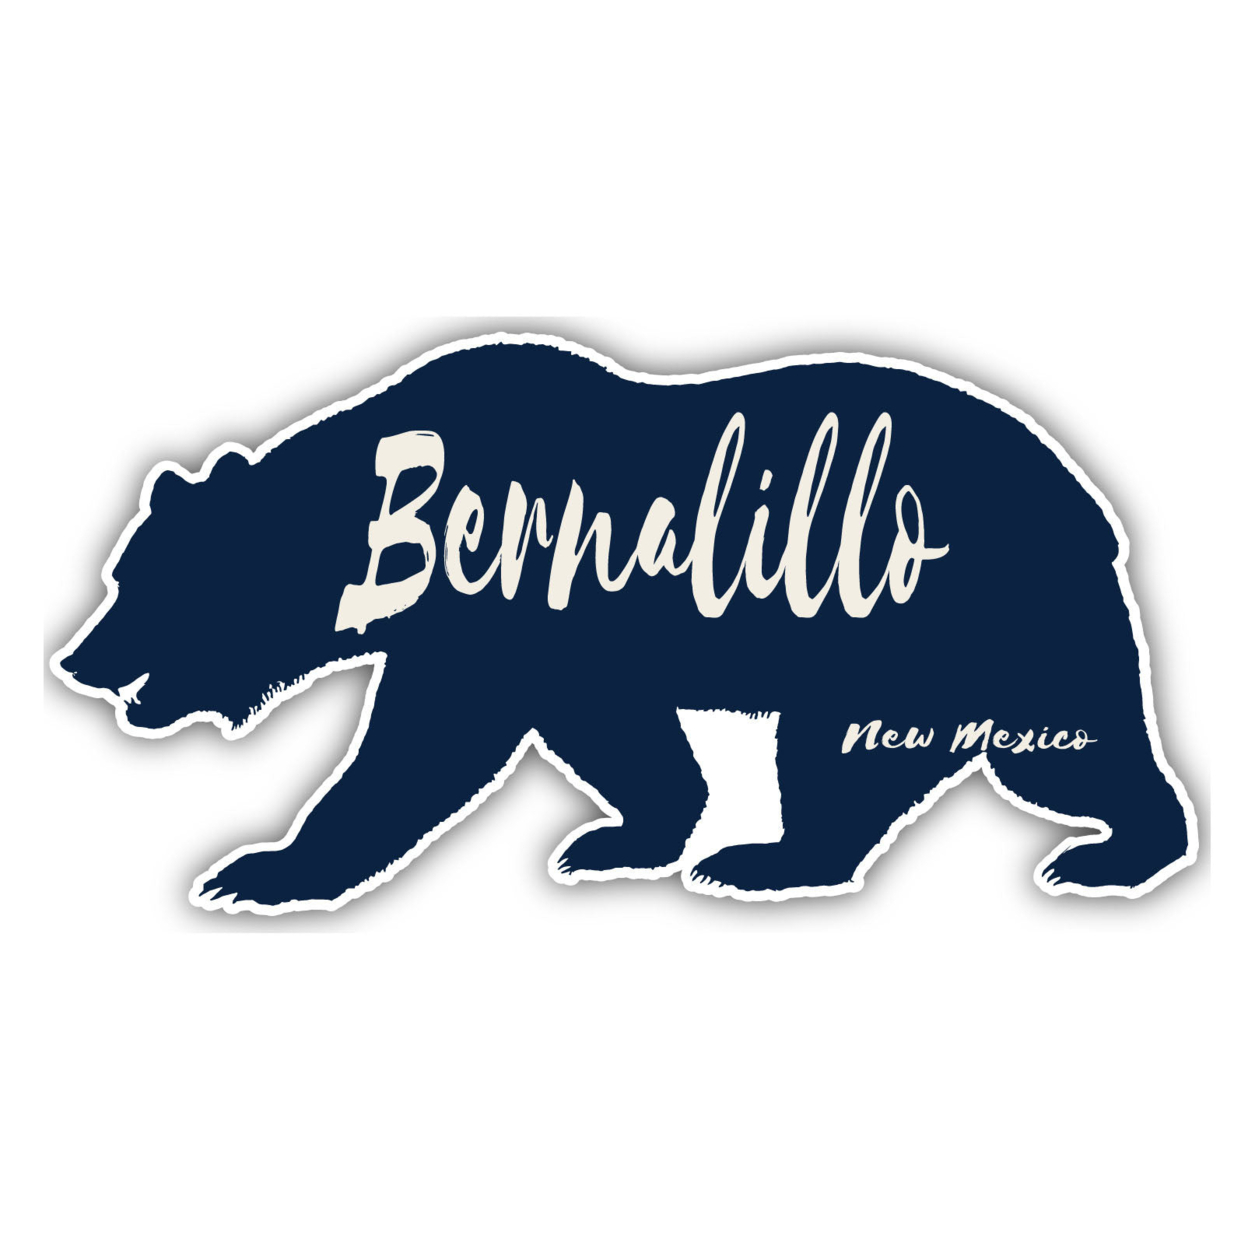 Bernalillo New Mexico Souvenir Decorative Stickers (Choose Theme And Size) - 4-Pack, 4-Inch, Camp Life